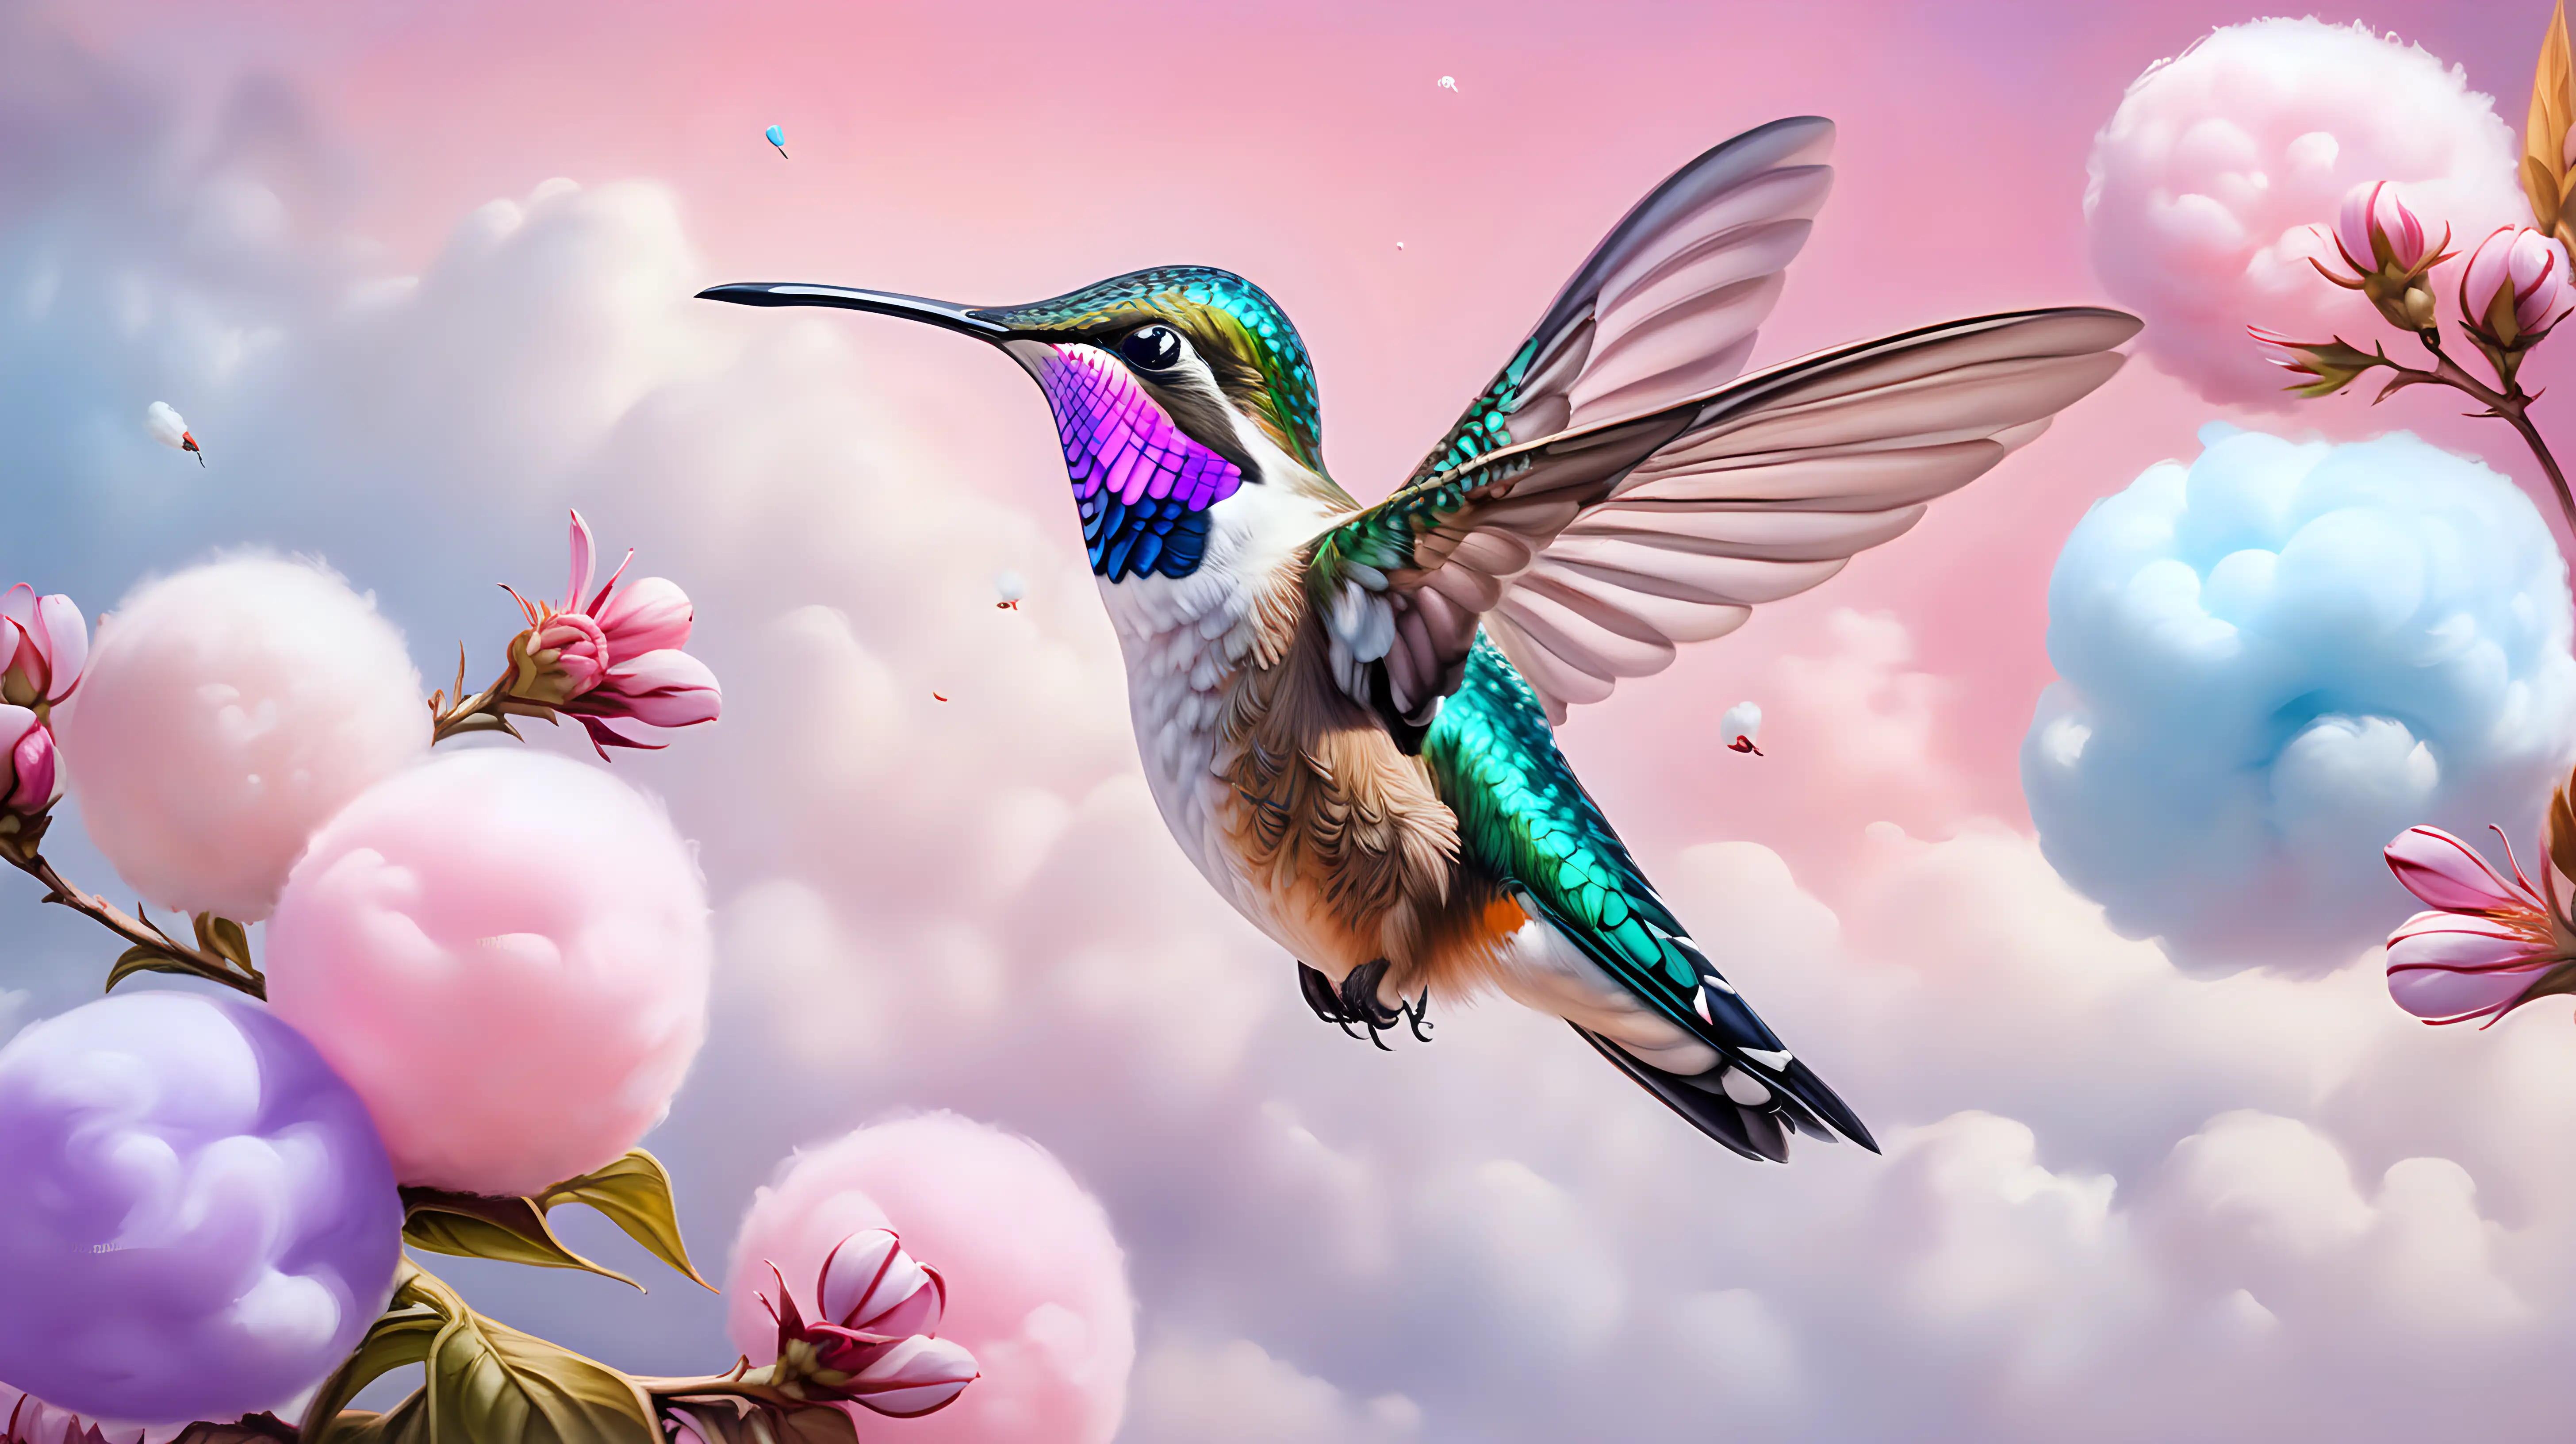 Enchanting Oil Painting of a Hummingbird Amid Pastel Cotton Candy Flowers and Clouds